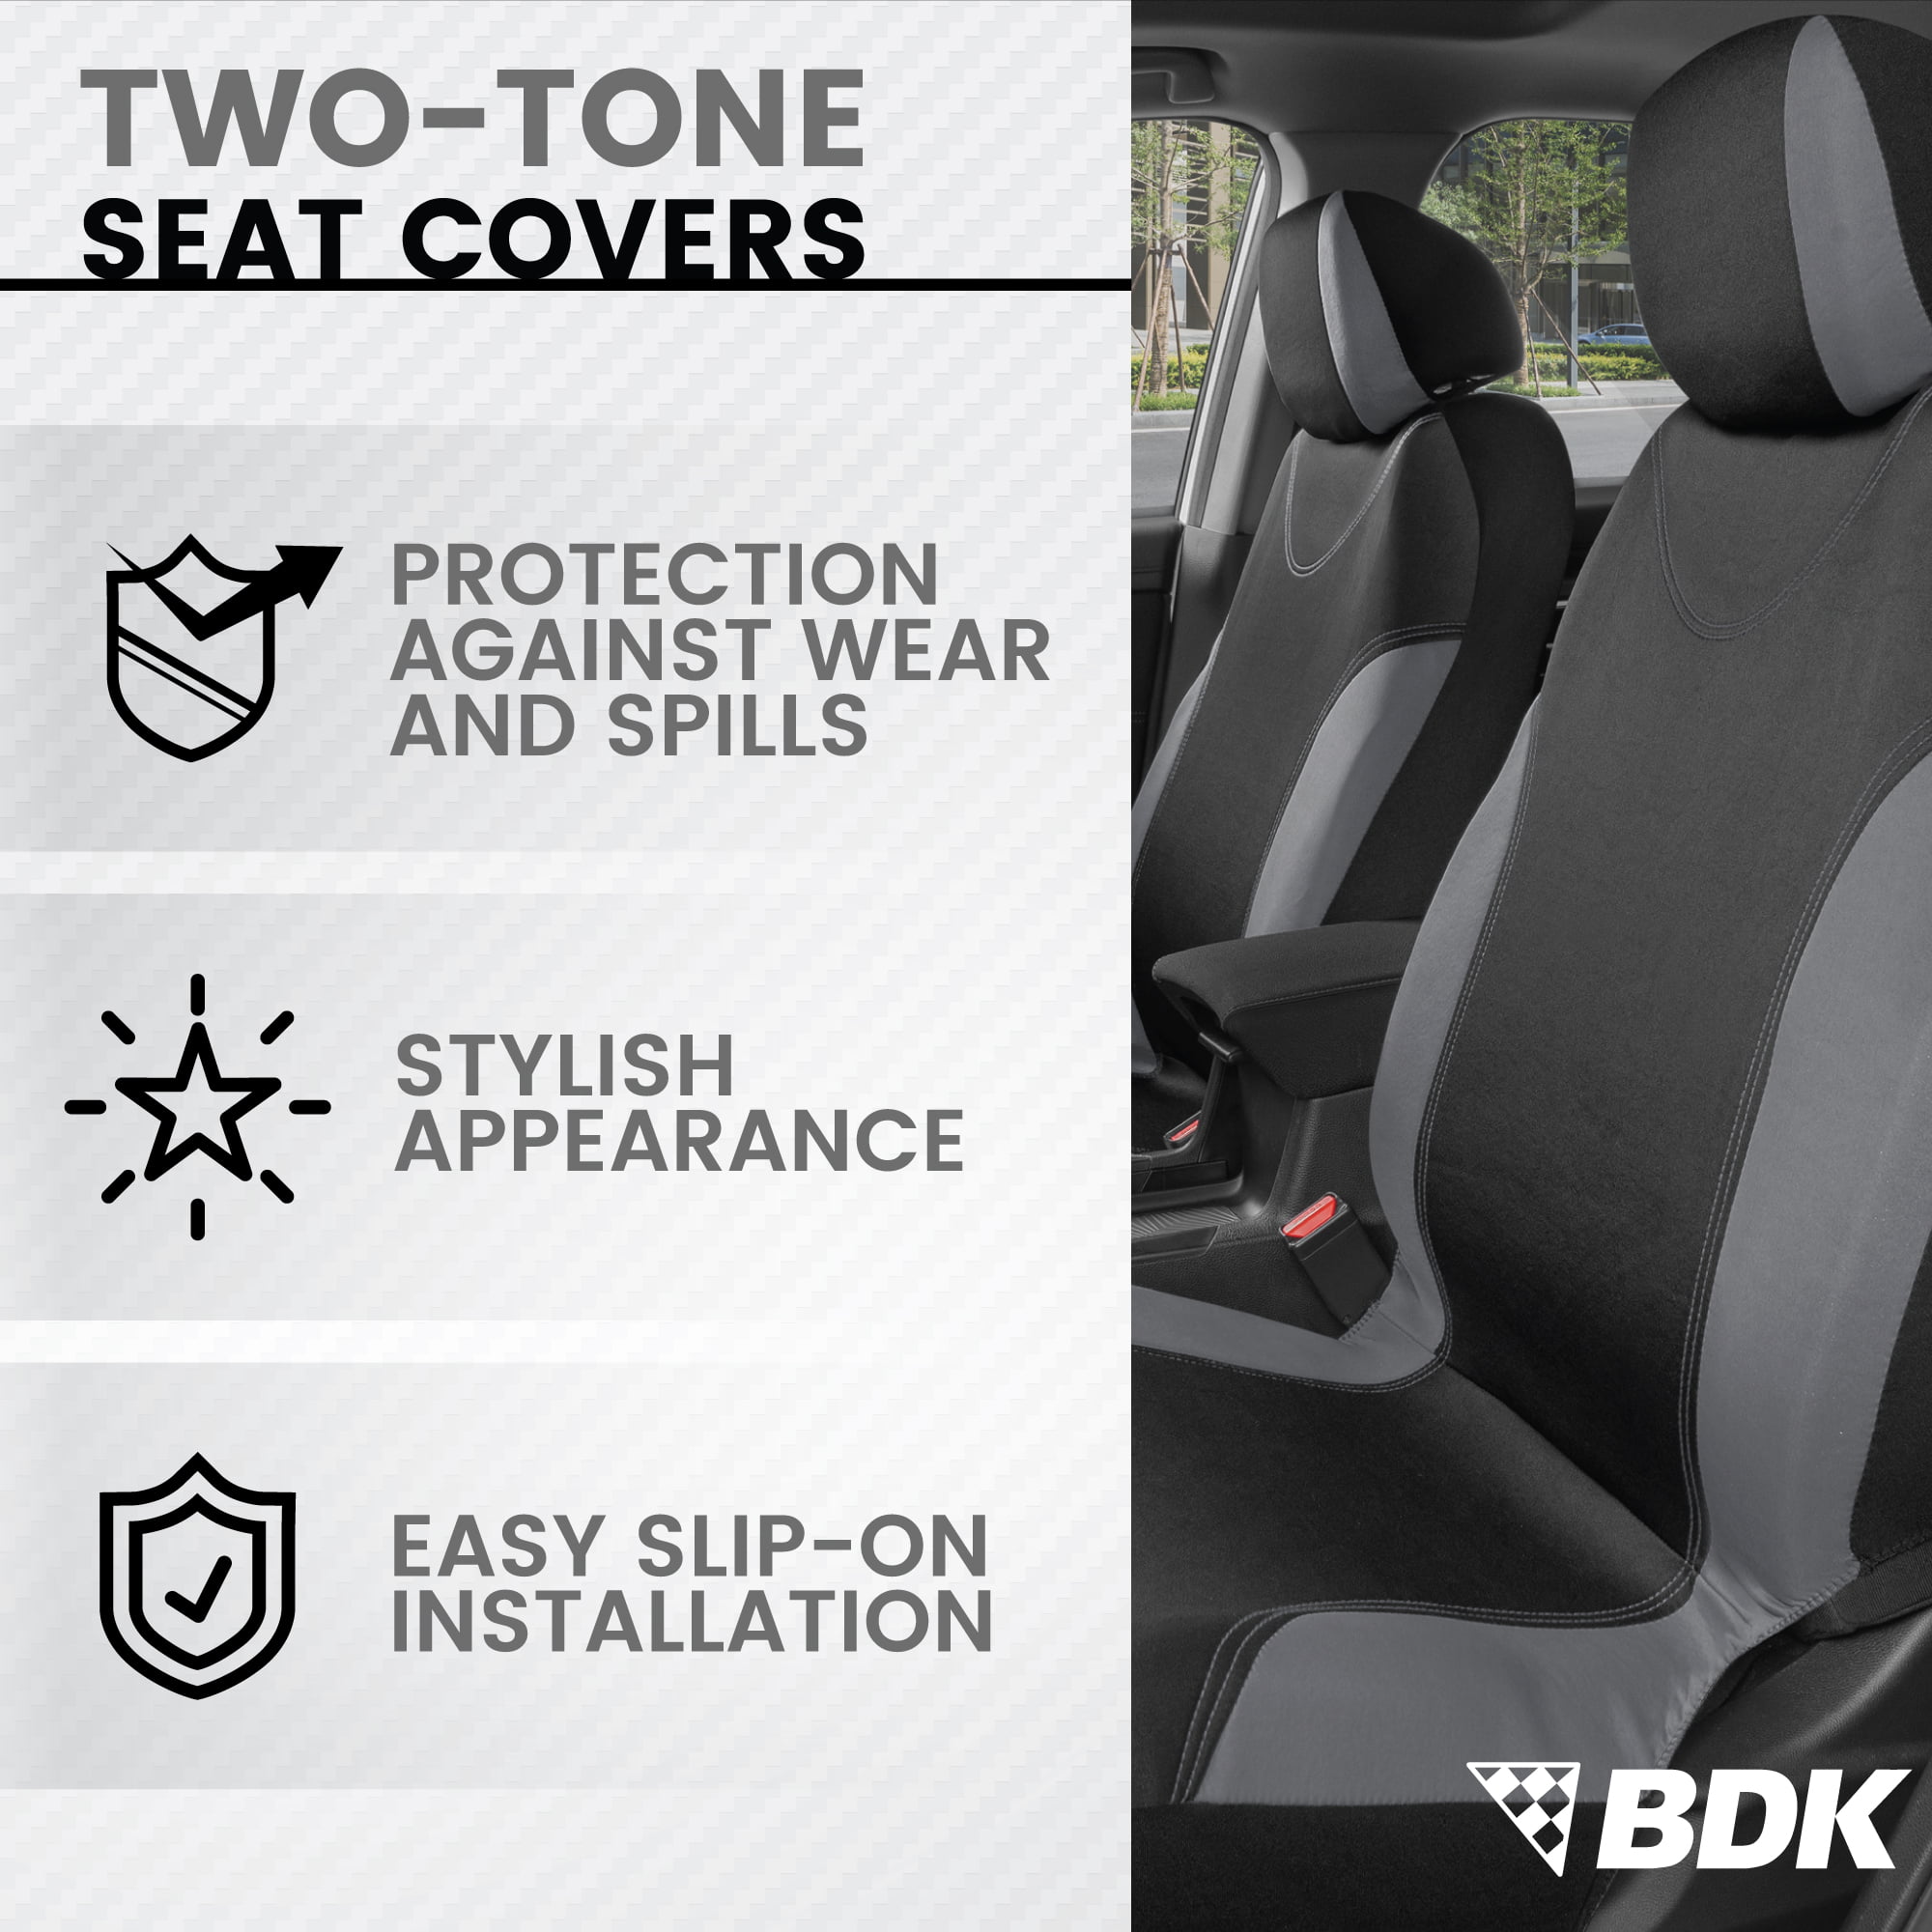 BDK Red Combo Fresh Design Matching All Protective Seat Covers 2 Front 1 Bench with Heavy Protection Sleek Graphic Auto Carpet Floor Mats 4 Set 